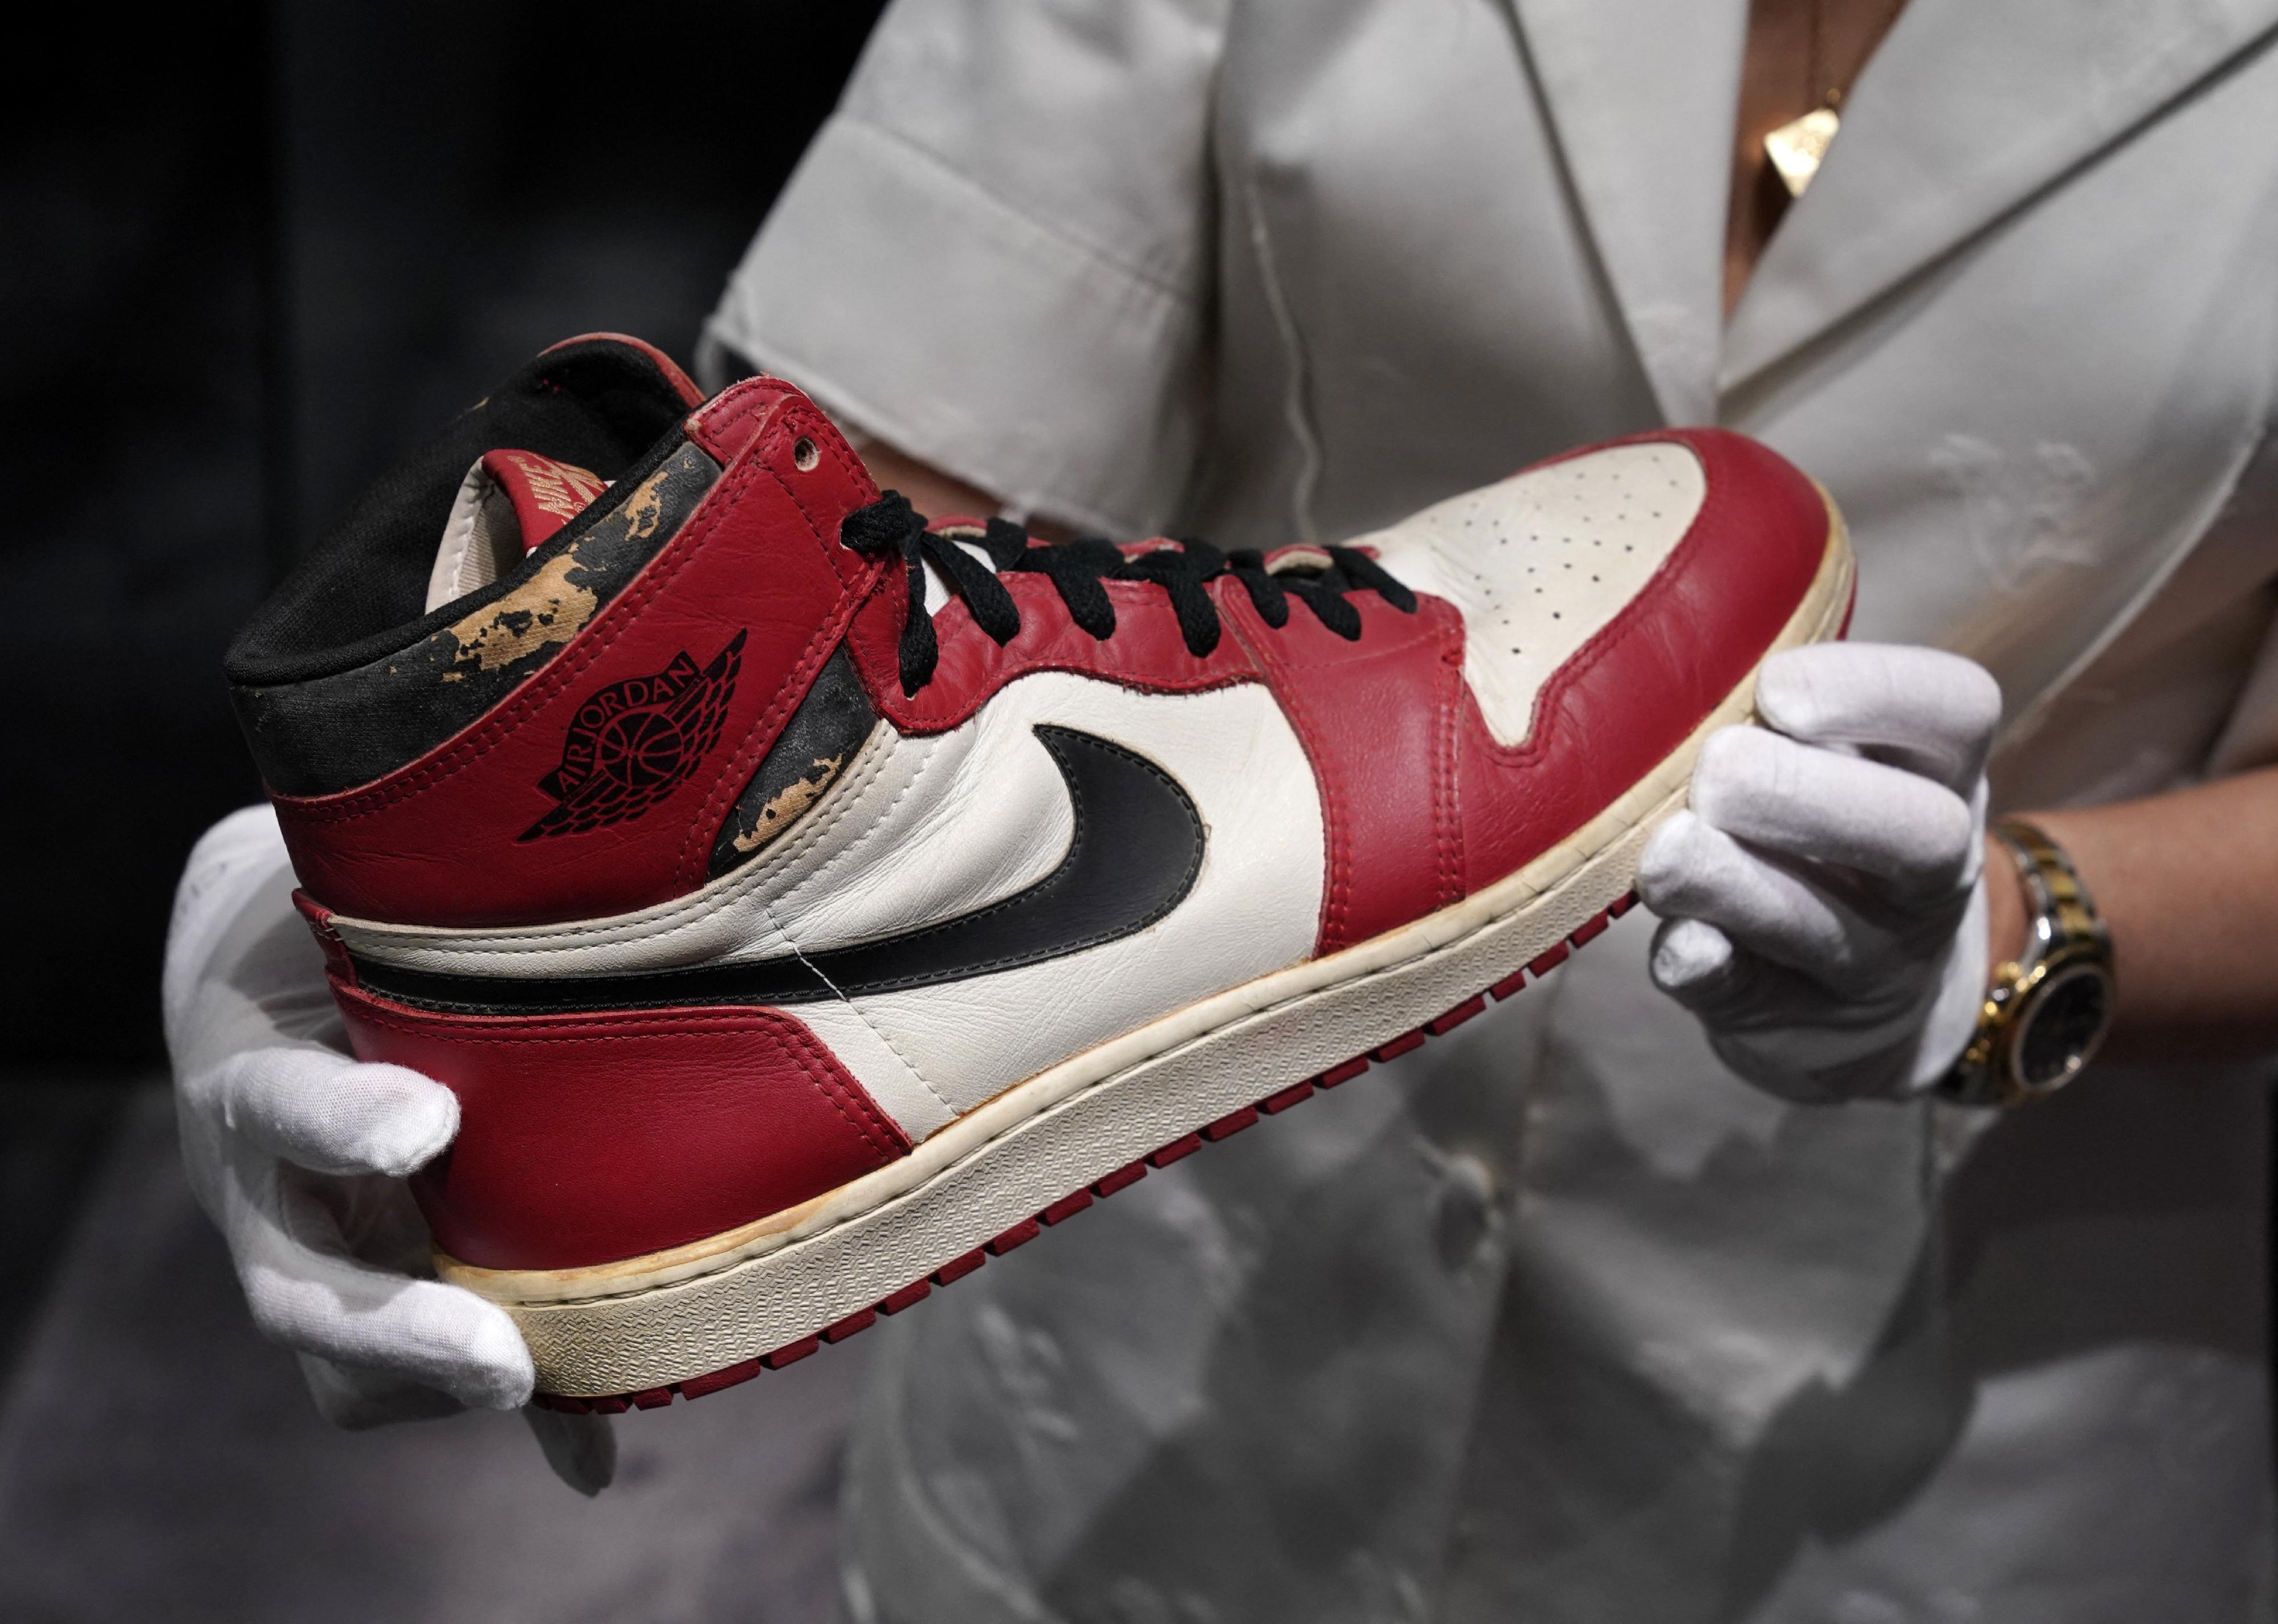 A person wearing white gloves holds the Air Jordan 1 High Shattered Backboard Origin Story, Game-Worn Signed Sneaker Nike, 1985 Size 13.5, red, white and black.